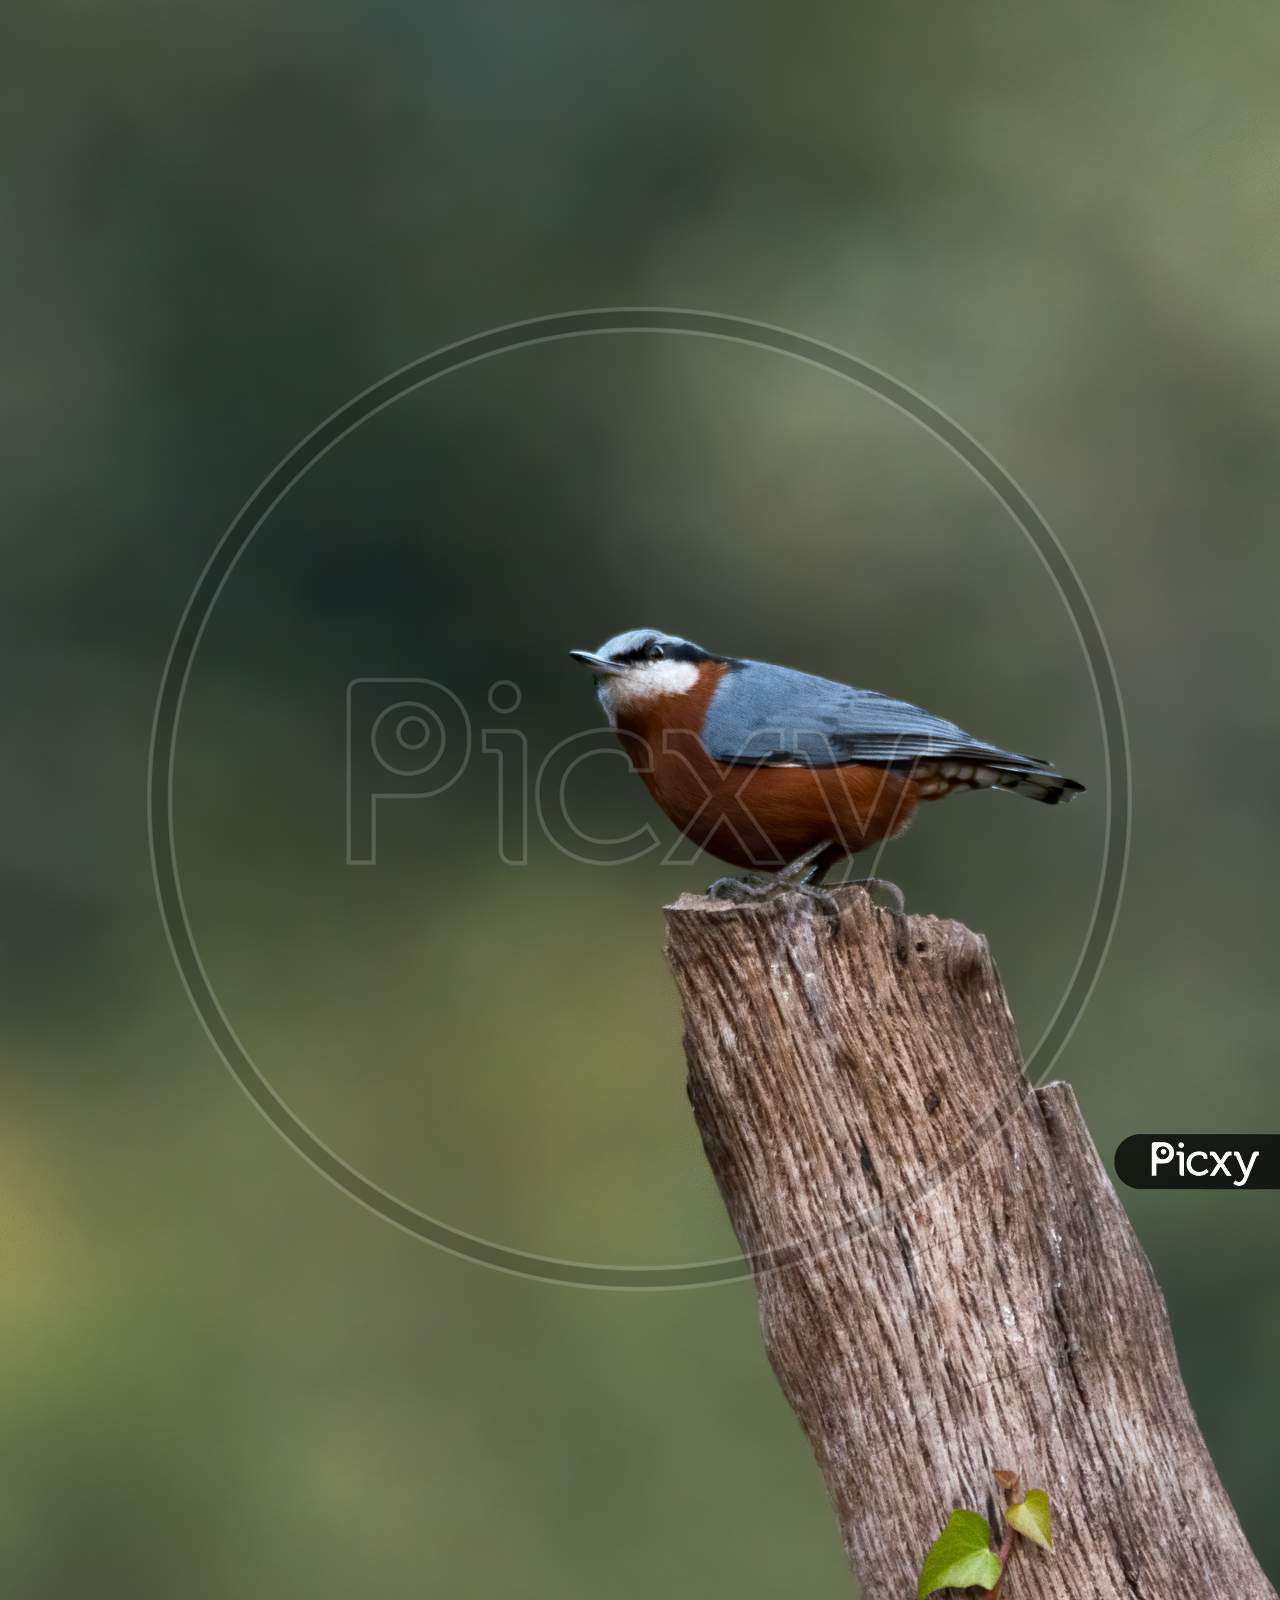 Chestnut-Bellied Nuthatch Perched On A Log